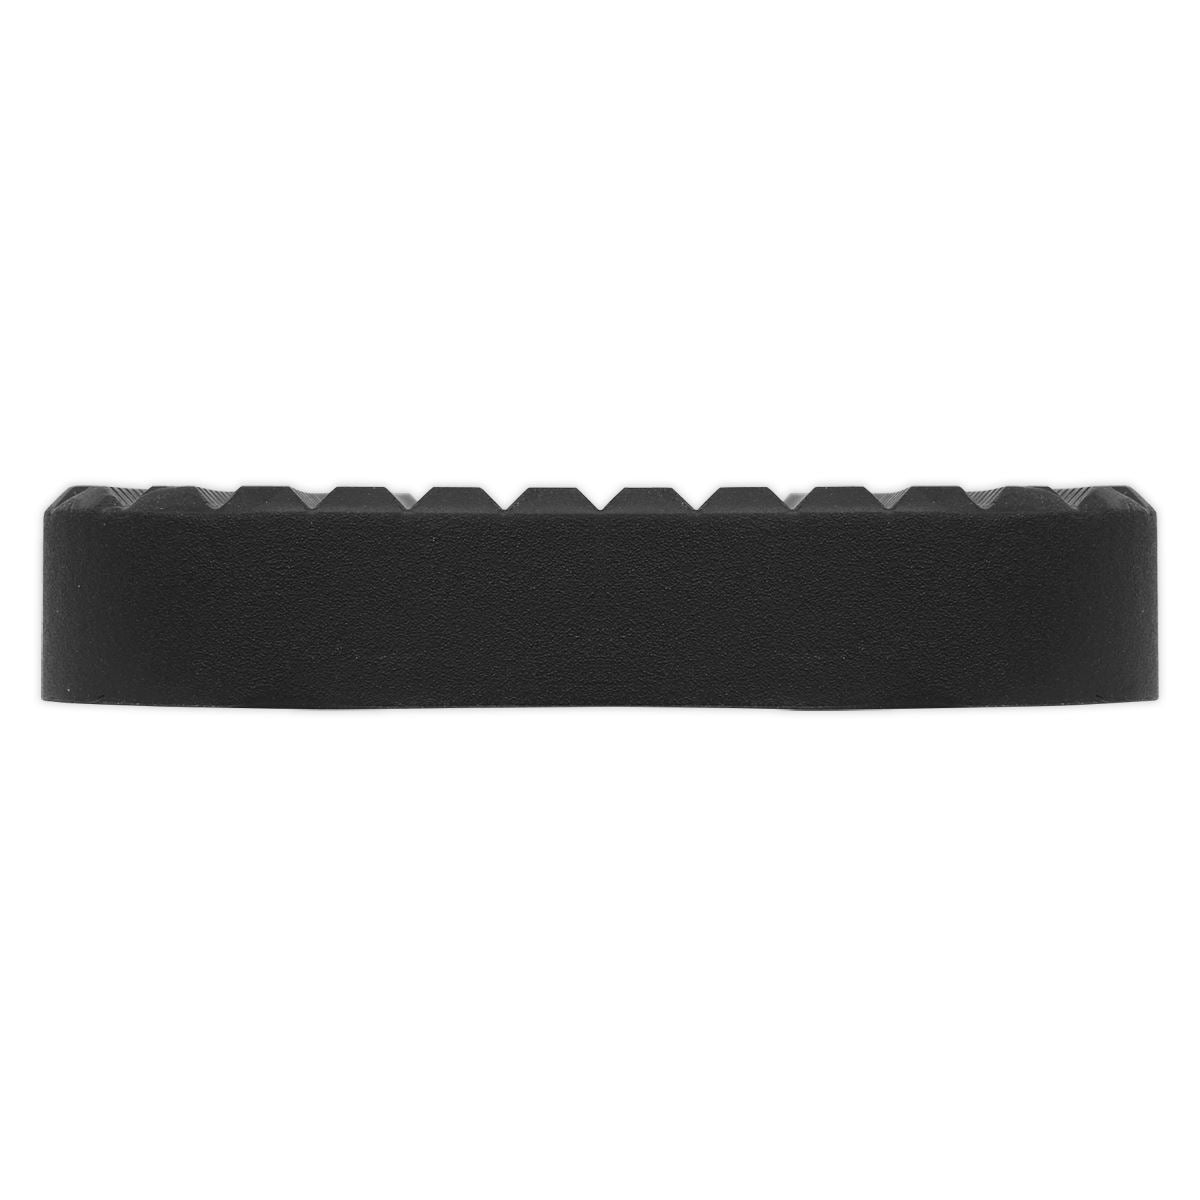 Sealey Safety Rubber Trolley Jack Pad Type A To Fit 100-106mm Saddle